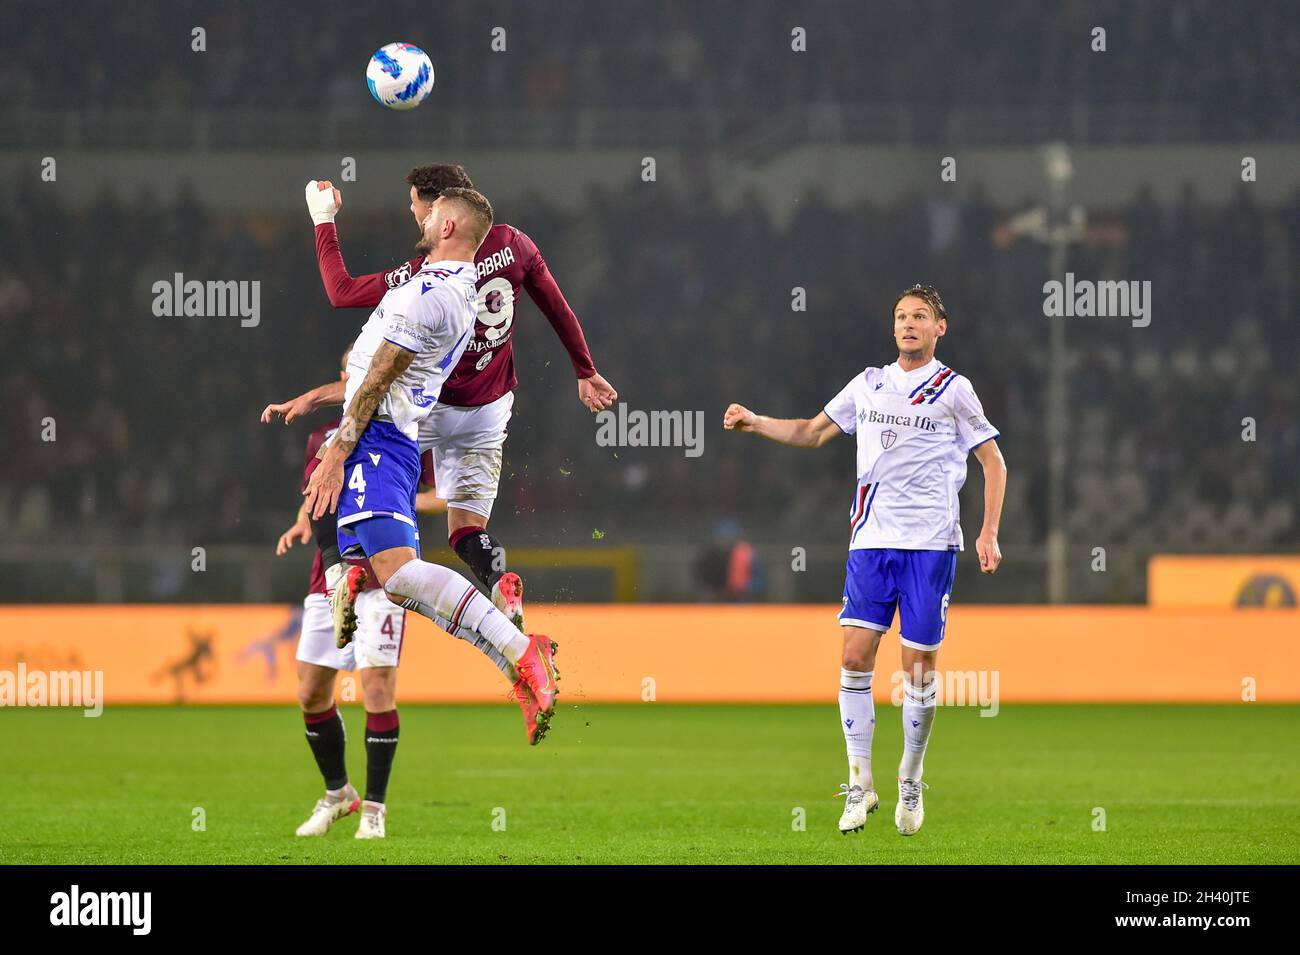 Torino, Italy. 30th Oct, 2021. Julian Chabot of UC Sampdoria, Antonio Sanabria of Torino FC, during the Serie A match between Torino FC and UC Sampdoria on October, 30th, 2021 at Stadio Grande Torino in Torino, Italy. Picture by Credit: Antonio Polia/Alamy Live News Stock Photo